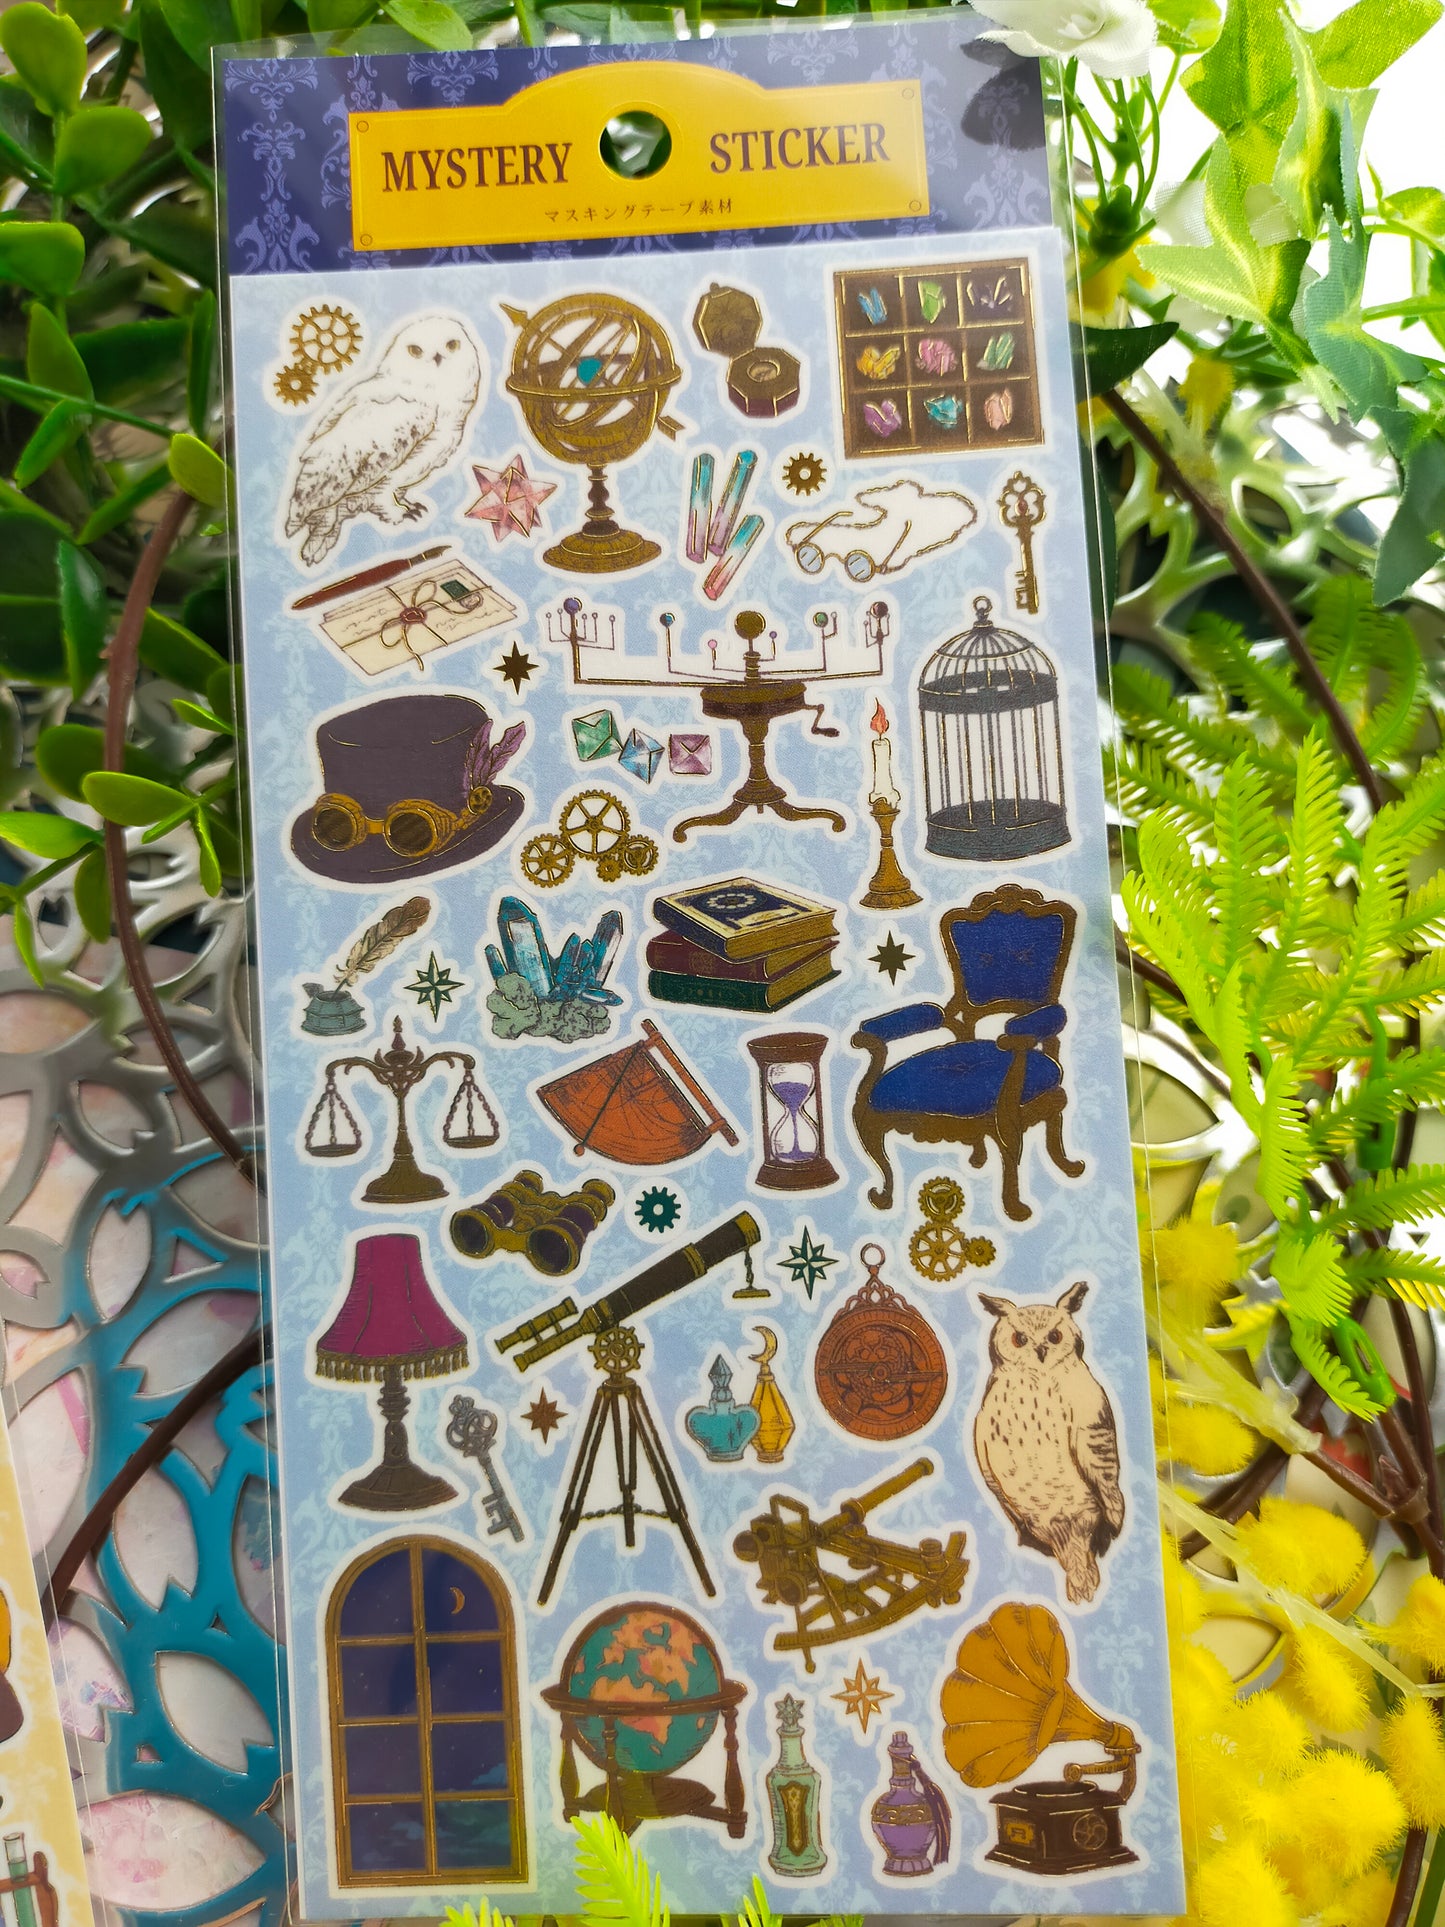 Mystery Tool Sticker, GAIA_Research / Magic tools / Key / Specimen  / 3D sealing wax-like / 3D Collection